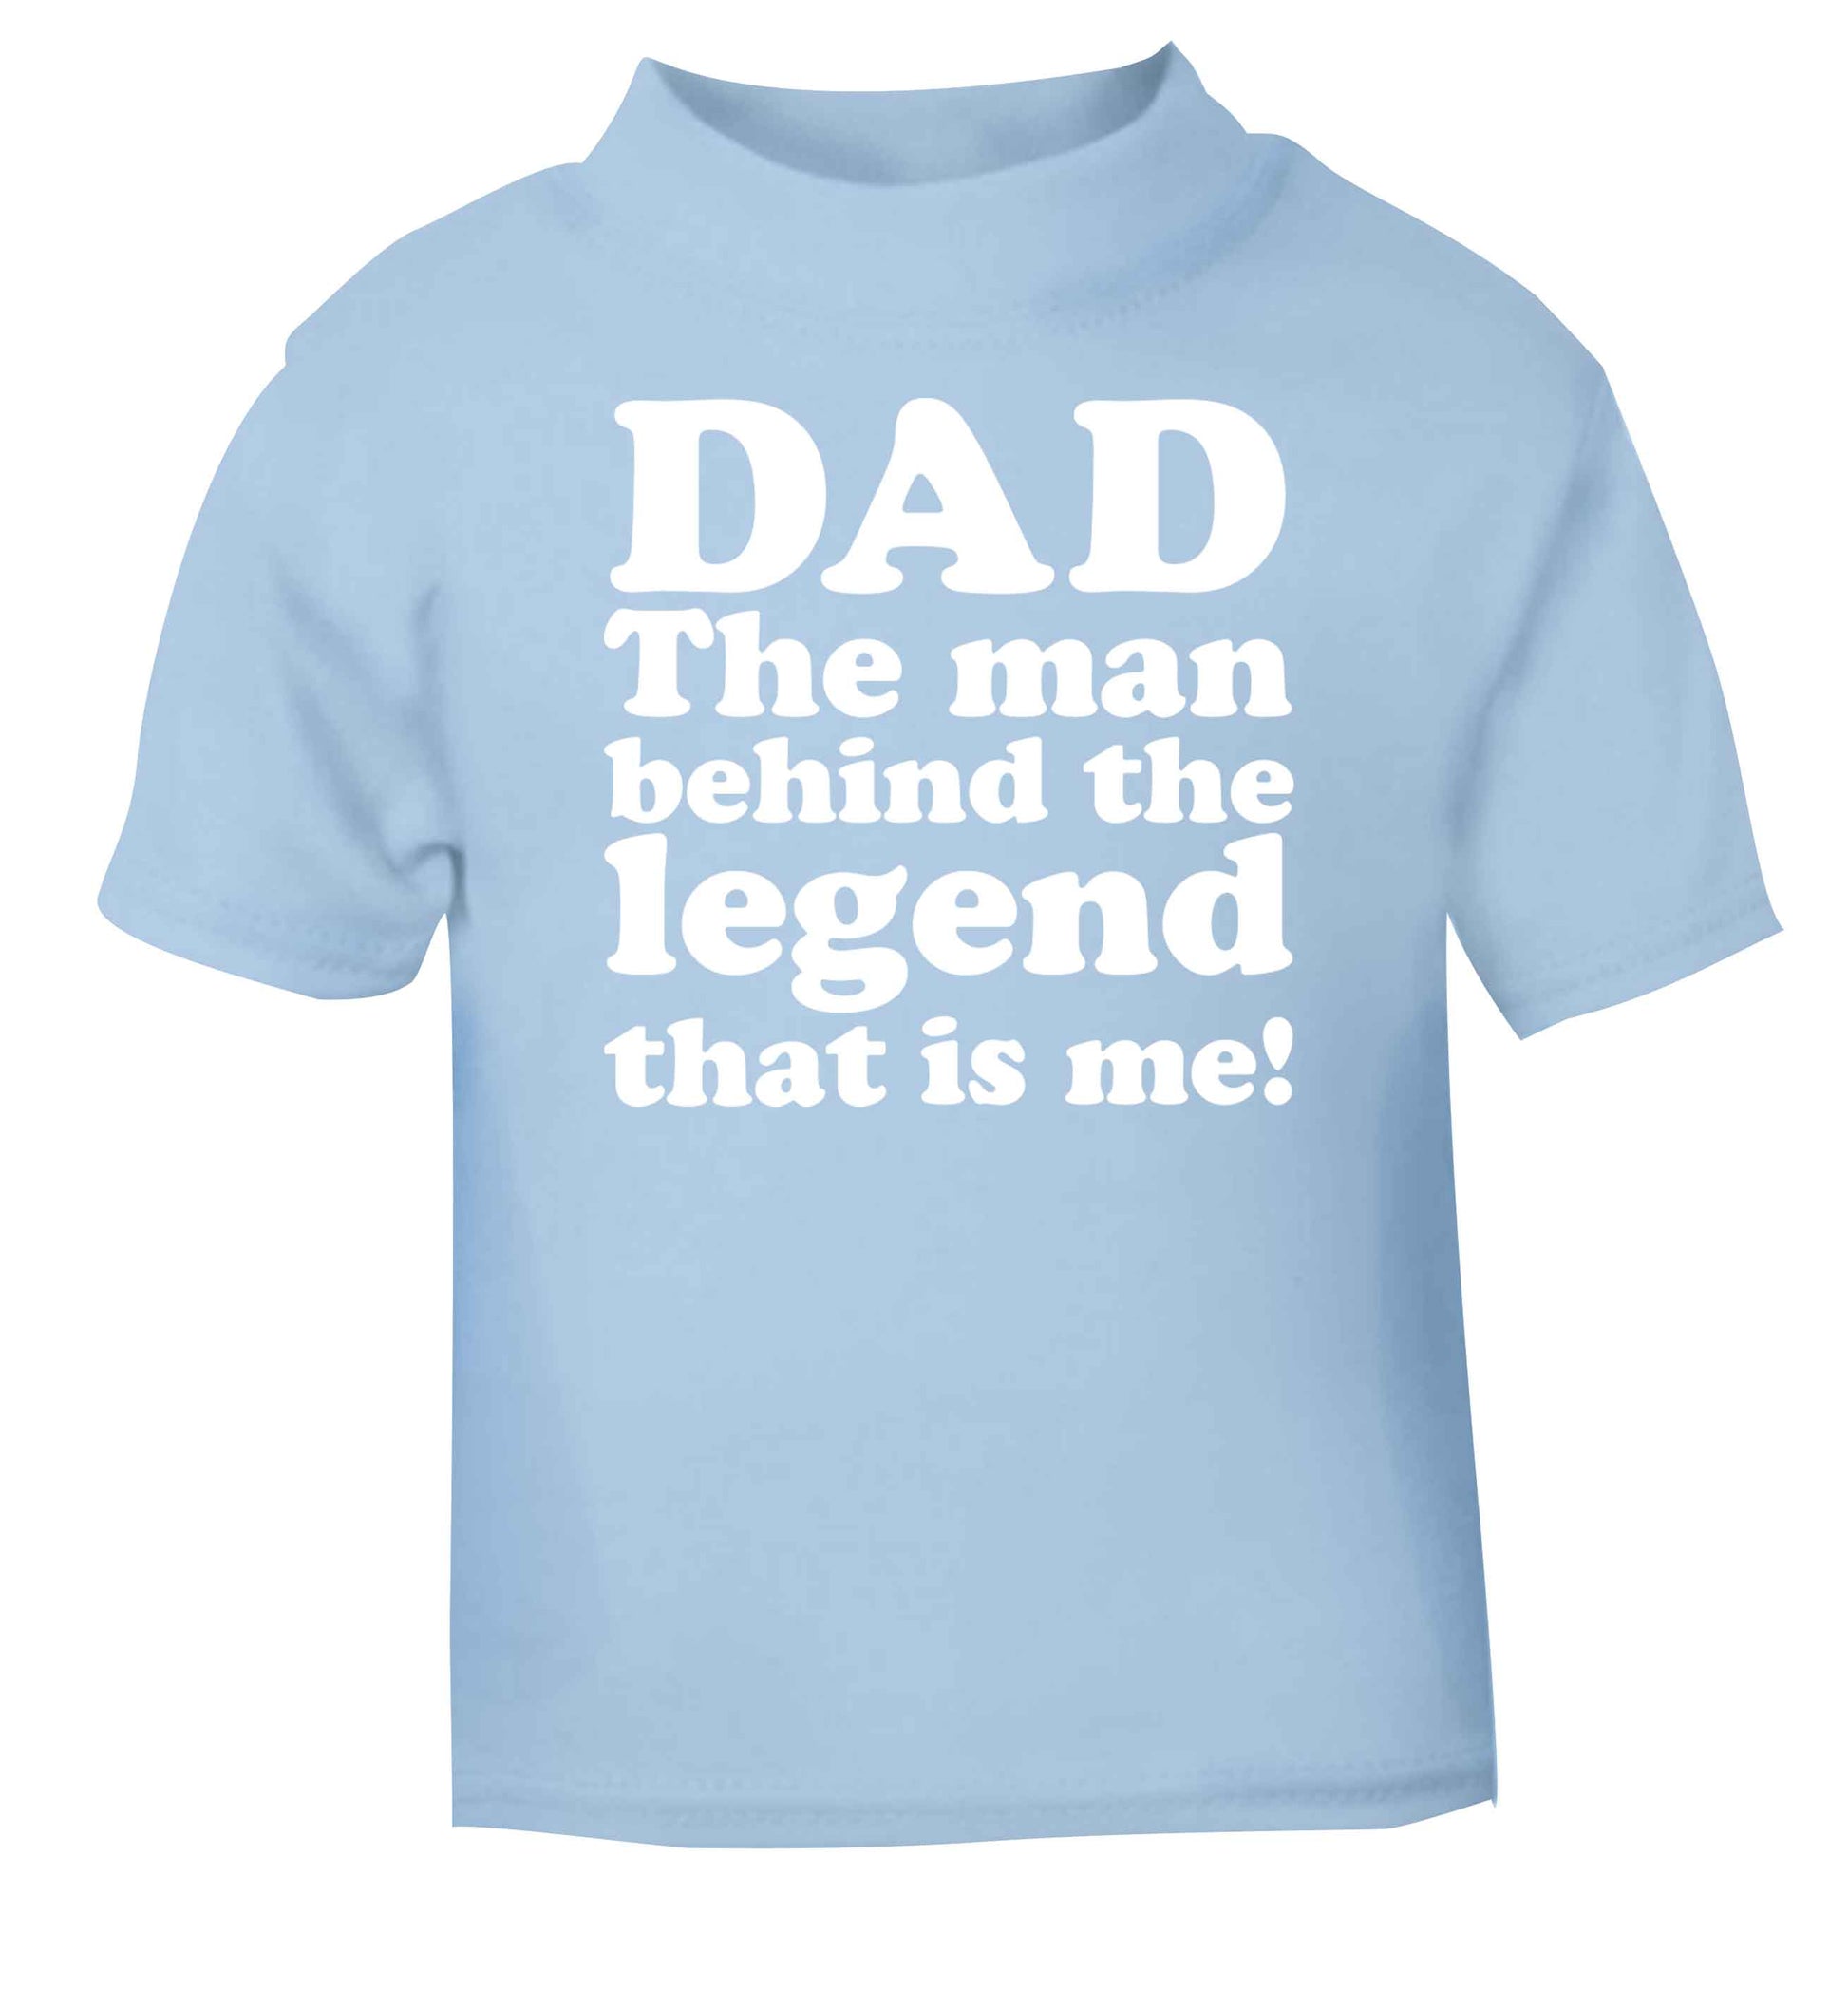 Dad the man behind the legend that is me light blue baby toddler Tshirt 2 Years